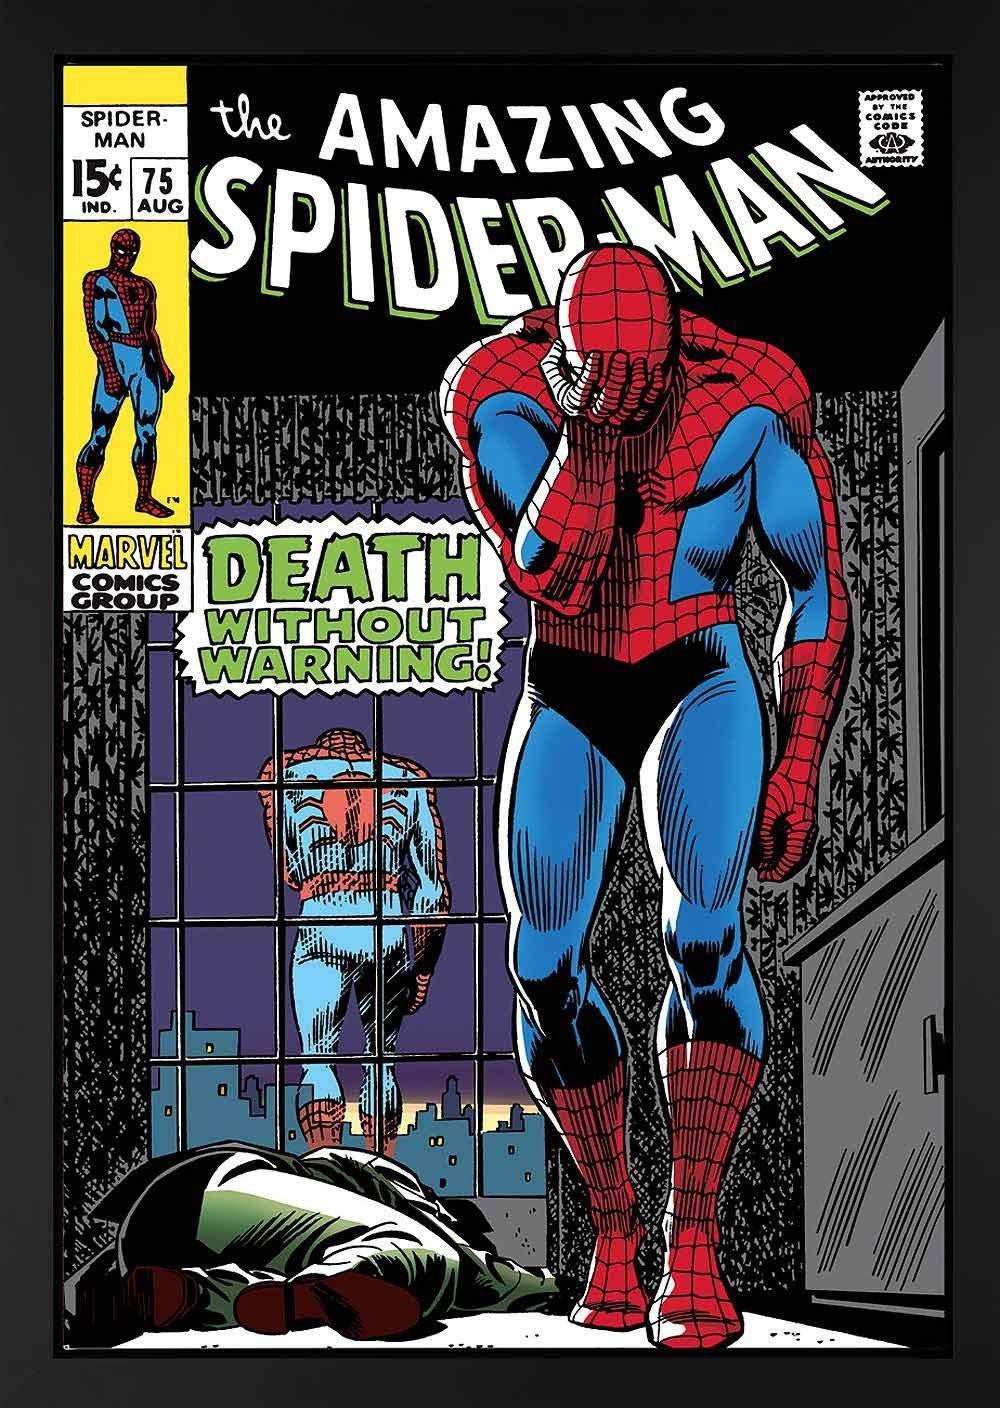 The Amazing Spider-Man #75 - Death Without Warning! - SOLD OUT Stan Lee The Amazing Spider-Man #75 - Death Without Warning! - SOLD OUT